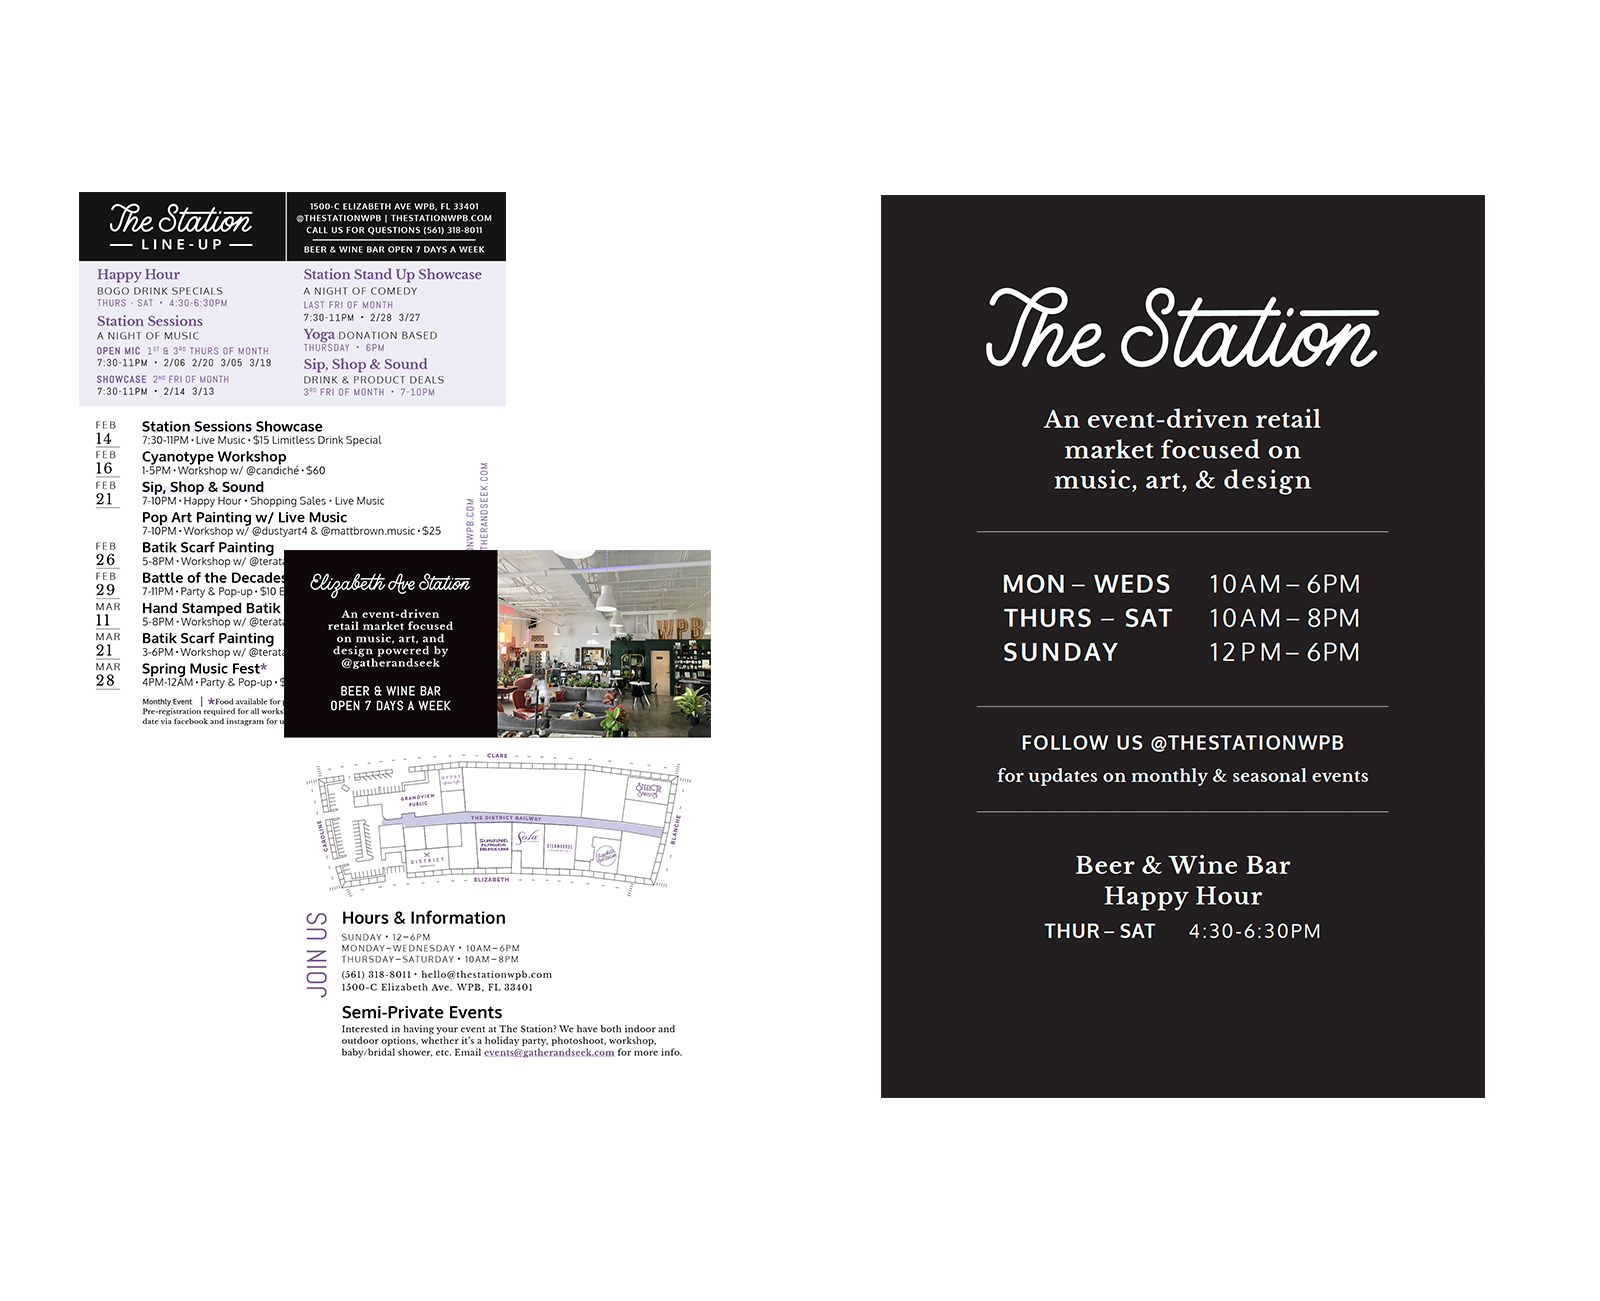 Printed flyer for Elizabeth Ave Station's upcoming and repeat events and a poster showing The Station logo, their tagline and hours of operation